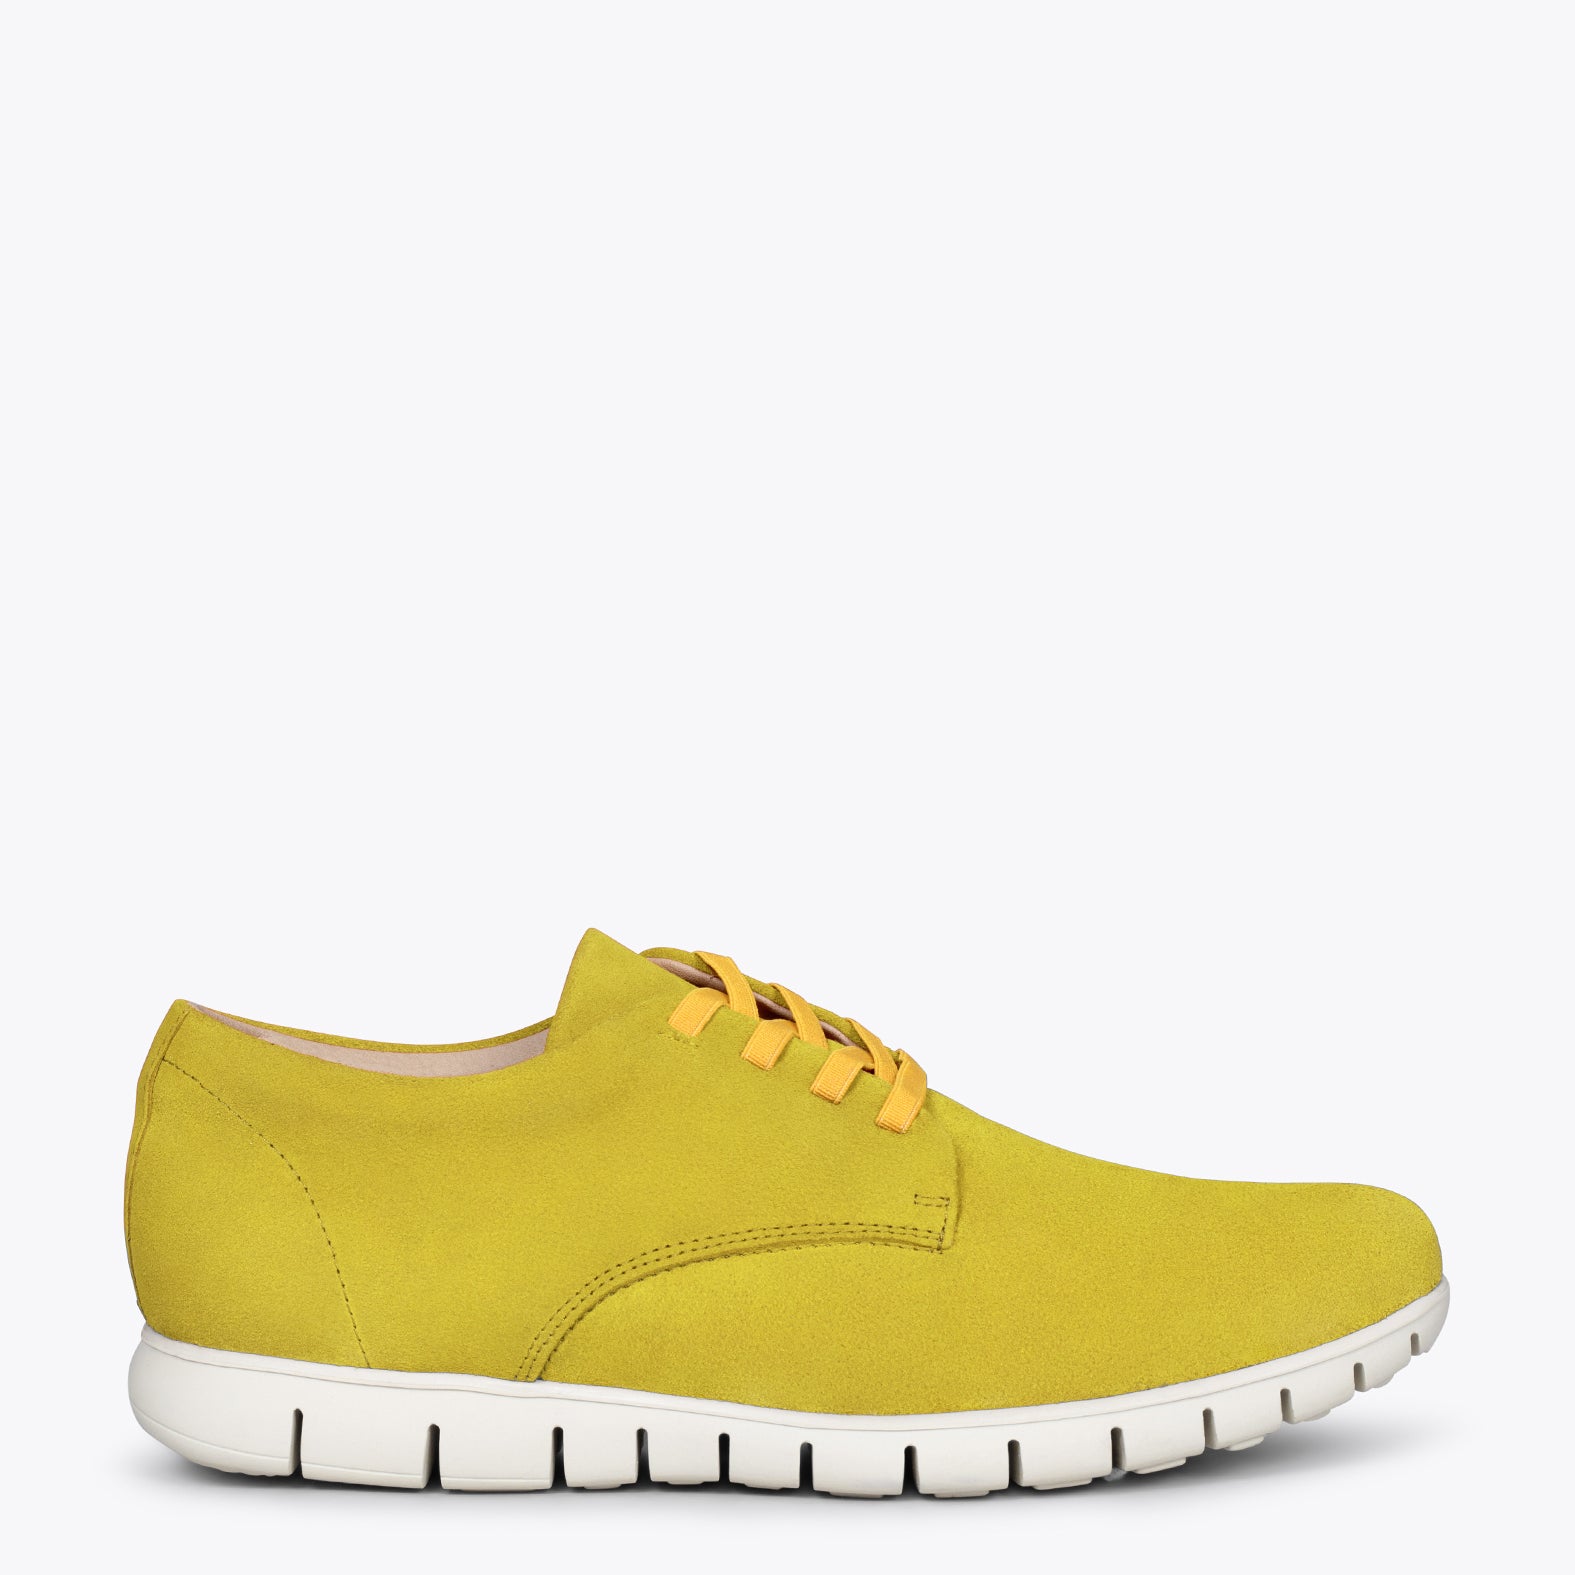 360 - Chaussures sportives pour homme JAUNE